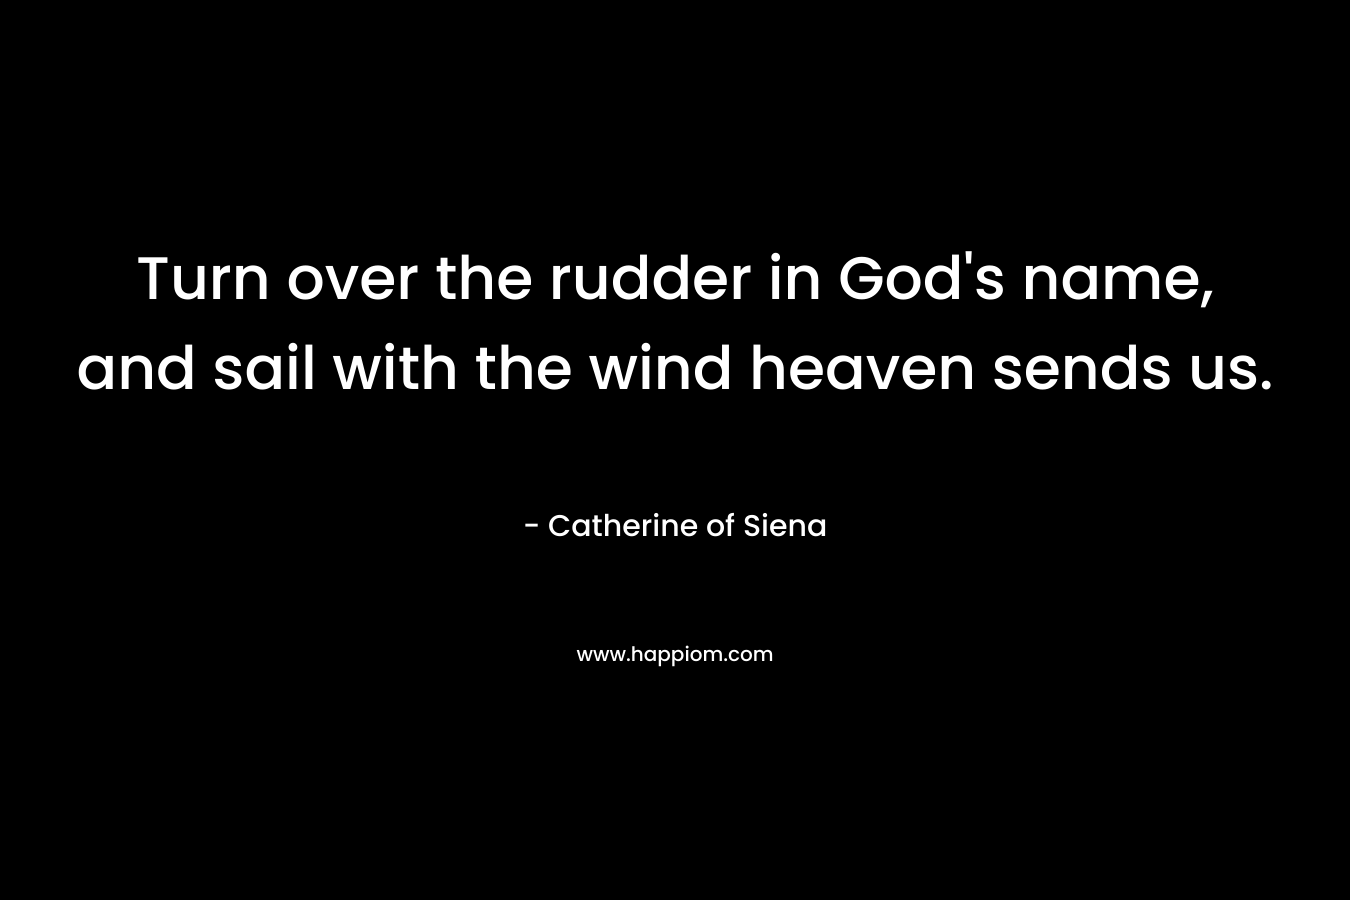 Turn over the rudder in God’s name, and sail with the wind heaven sends us. – Catherine of Siena